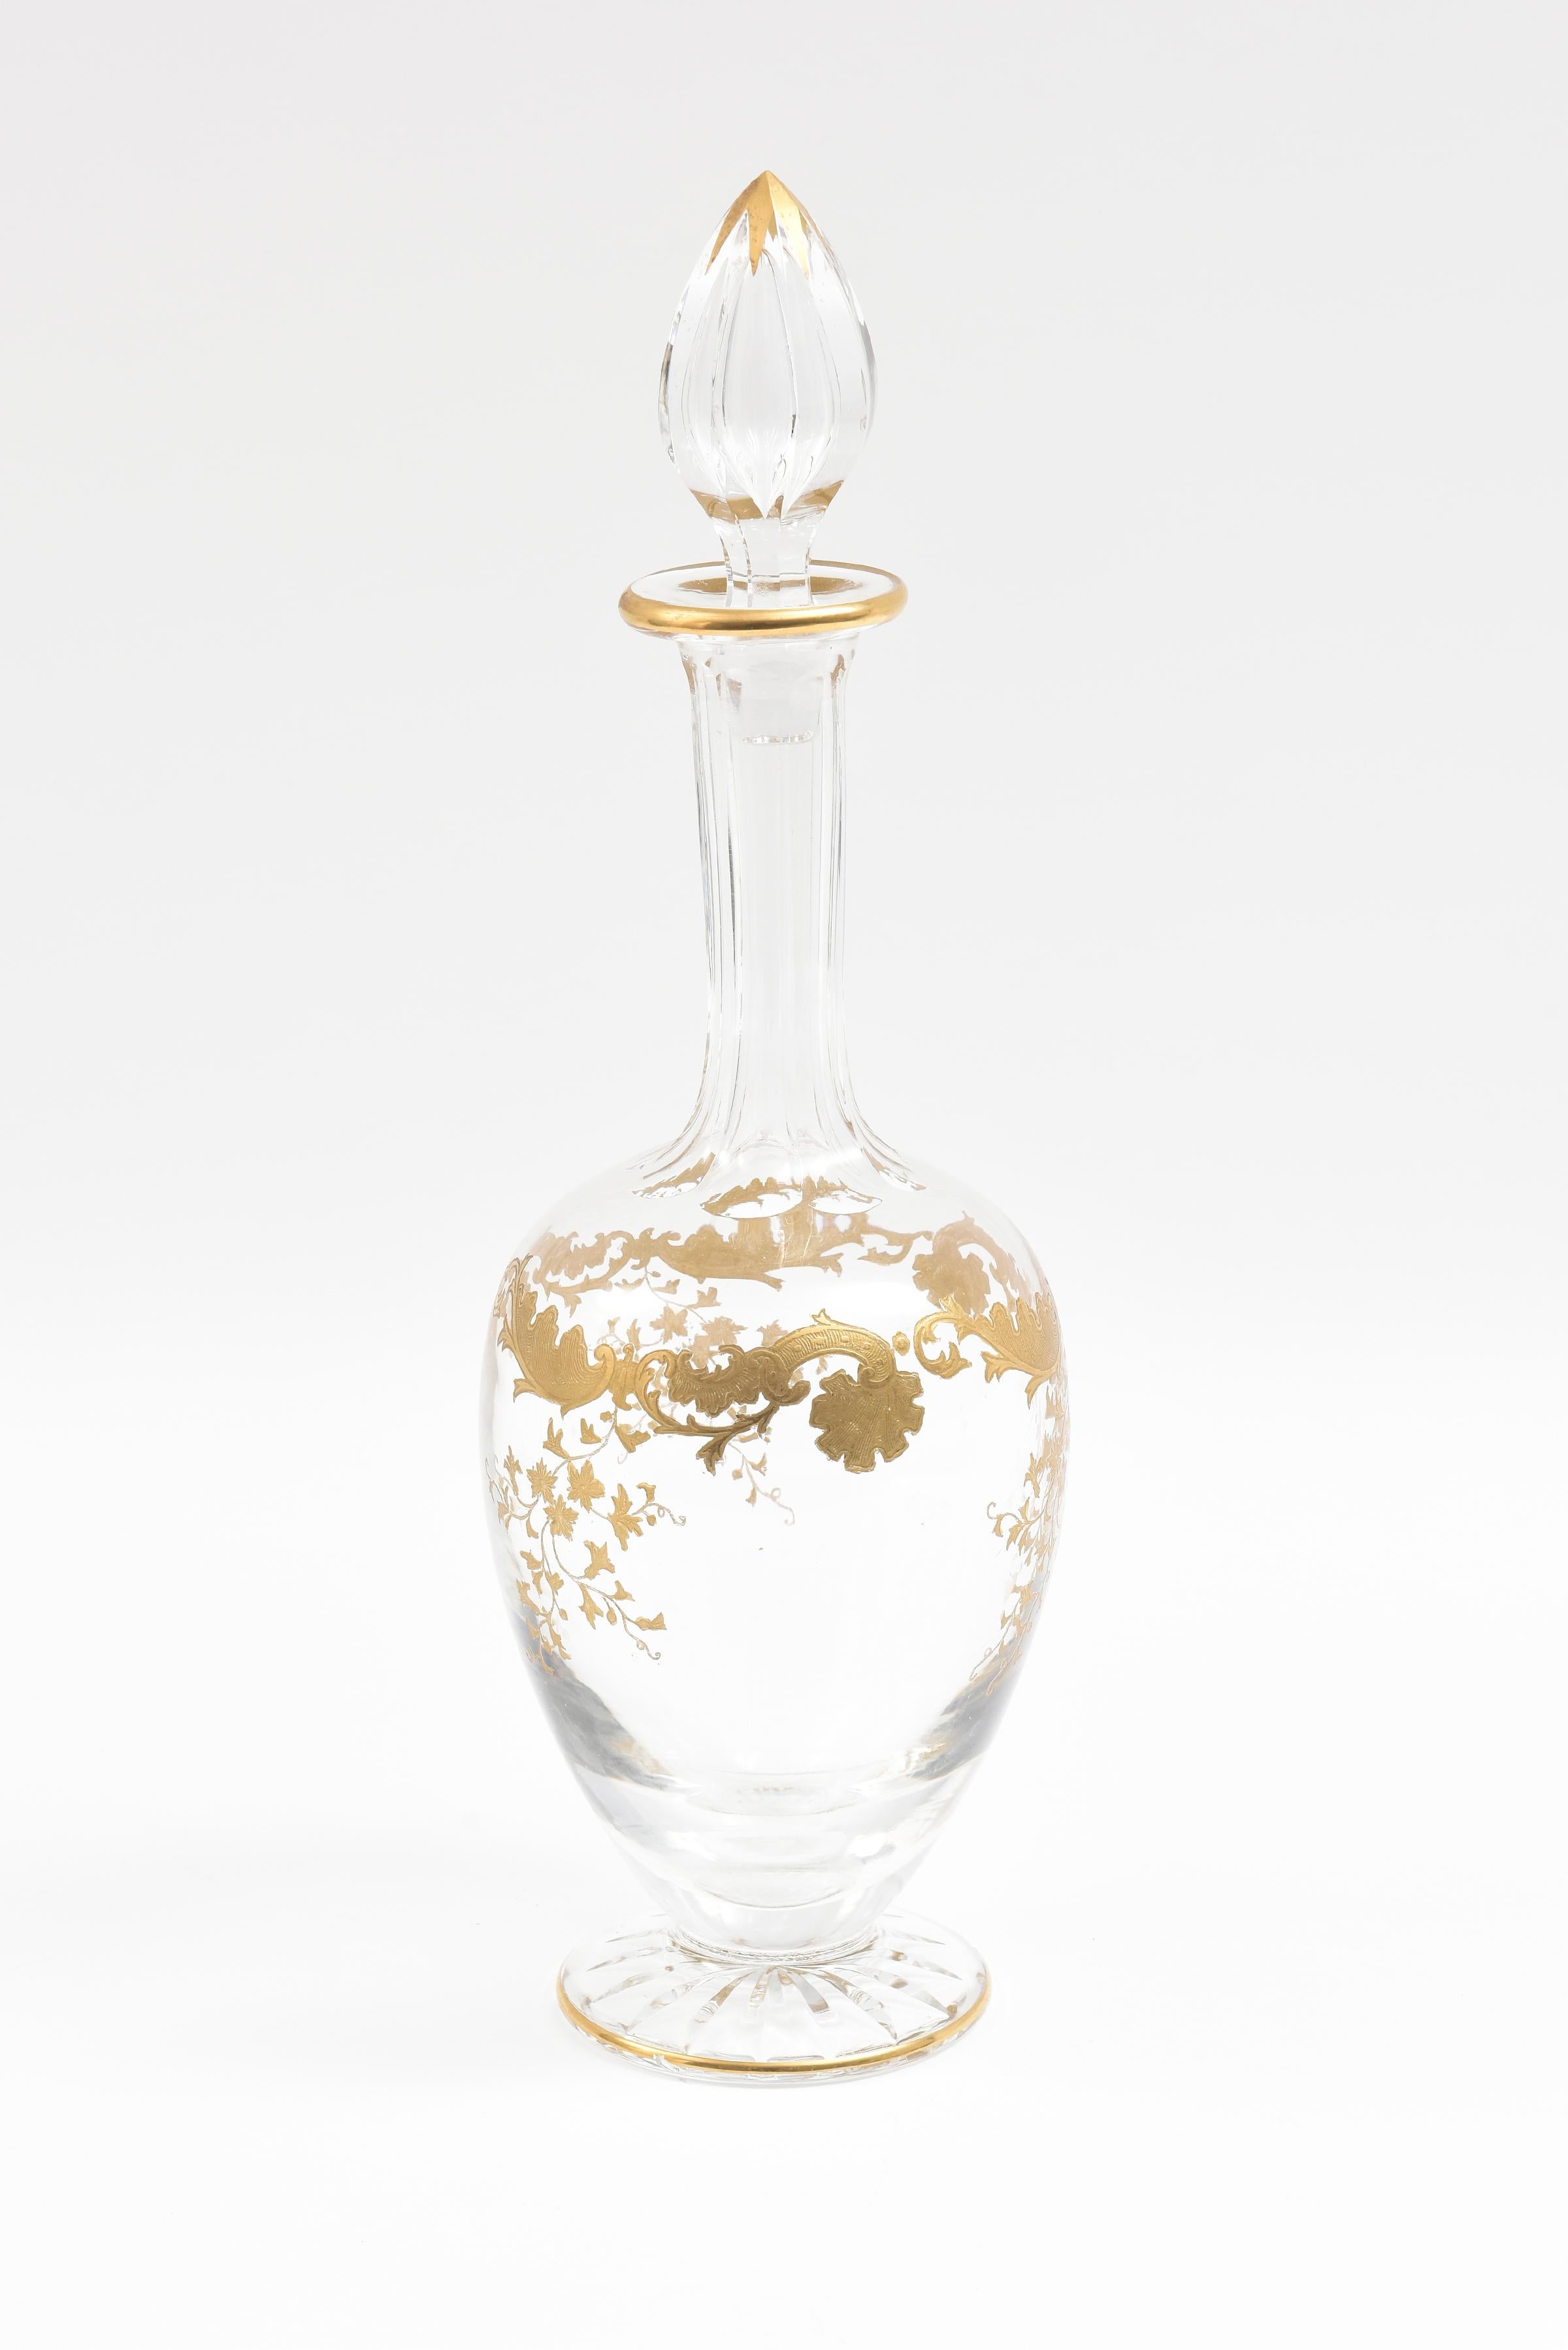 A Classic and elegant pattern from the Saint Louis crystal firm. This piece dates to just after the turn of the last century, circa 1910. Fine cut pedestal shape and rich gilding surround to the body of the decanter. In very nice antique condition.